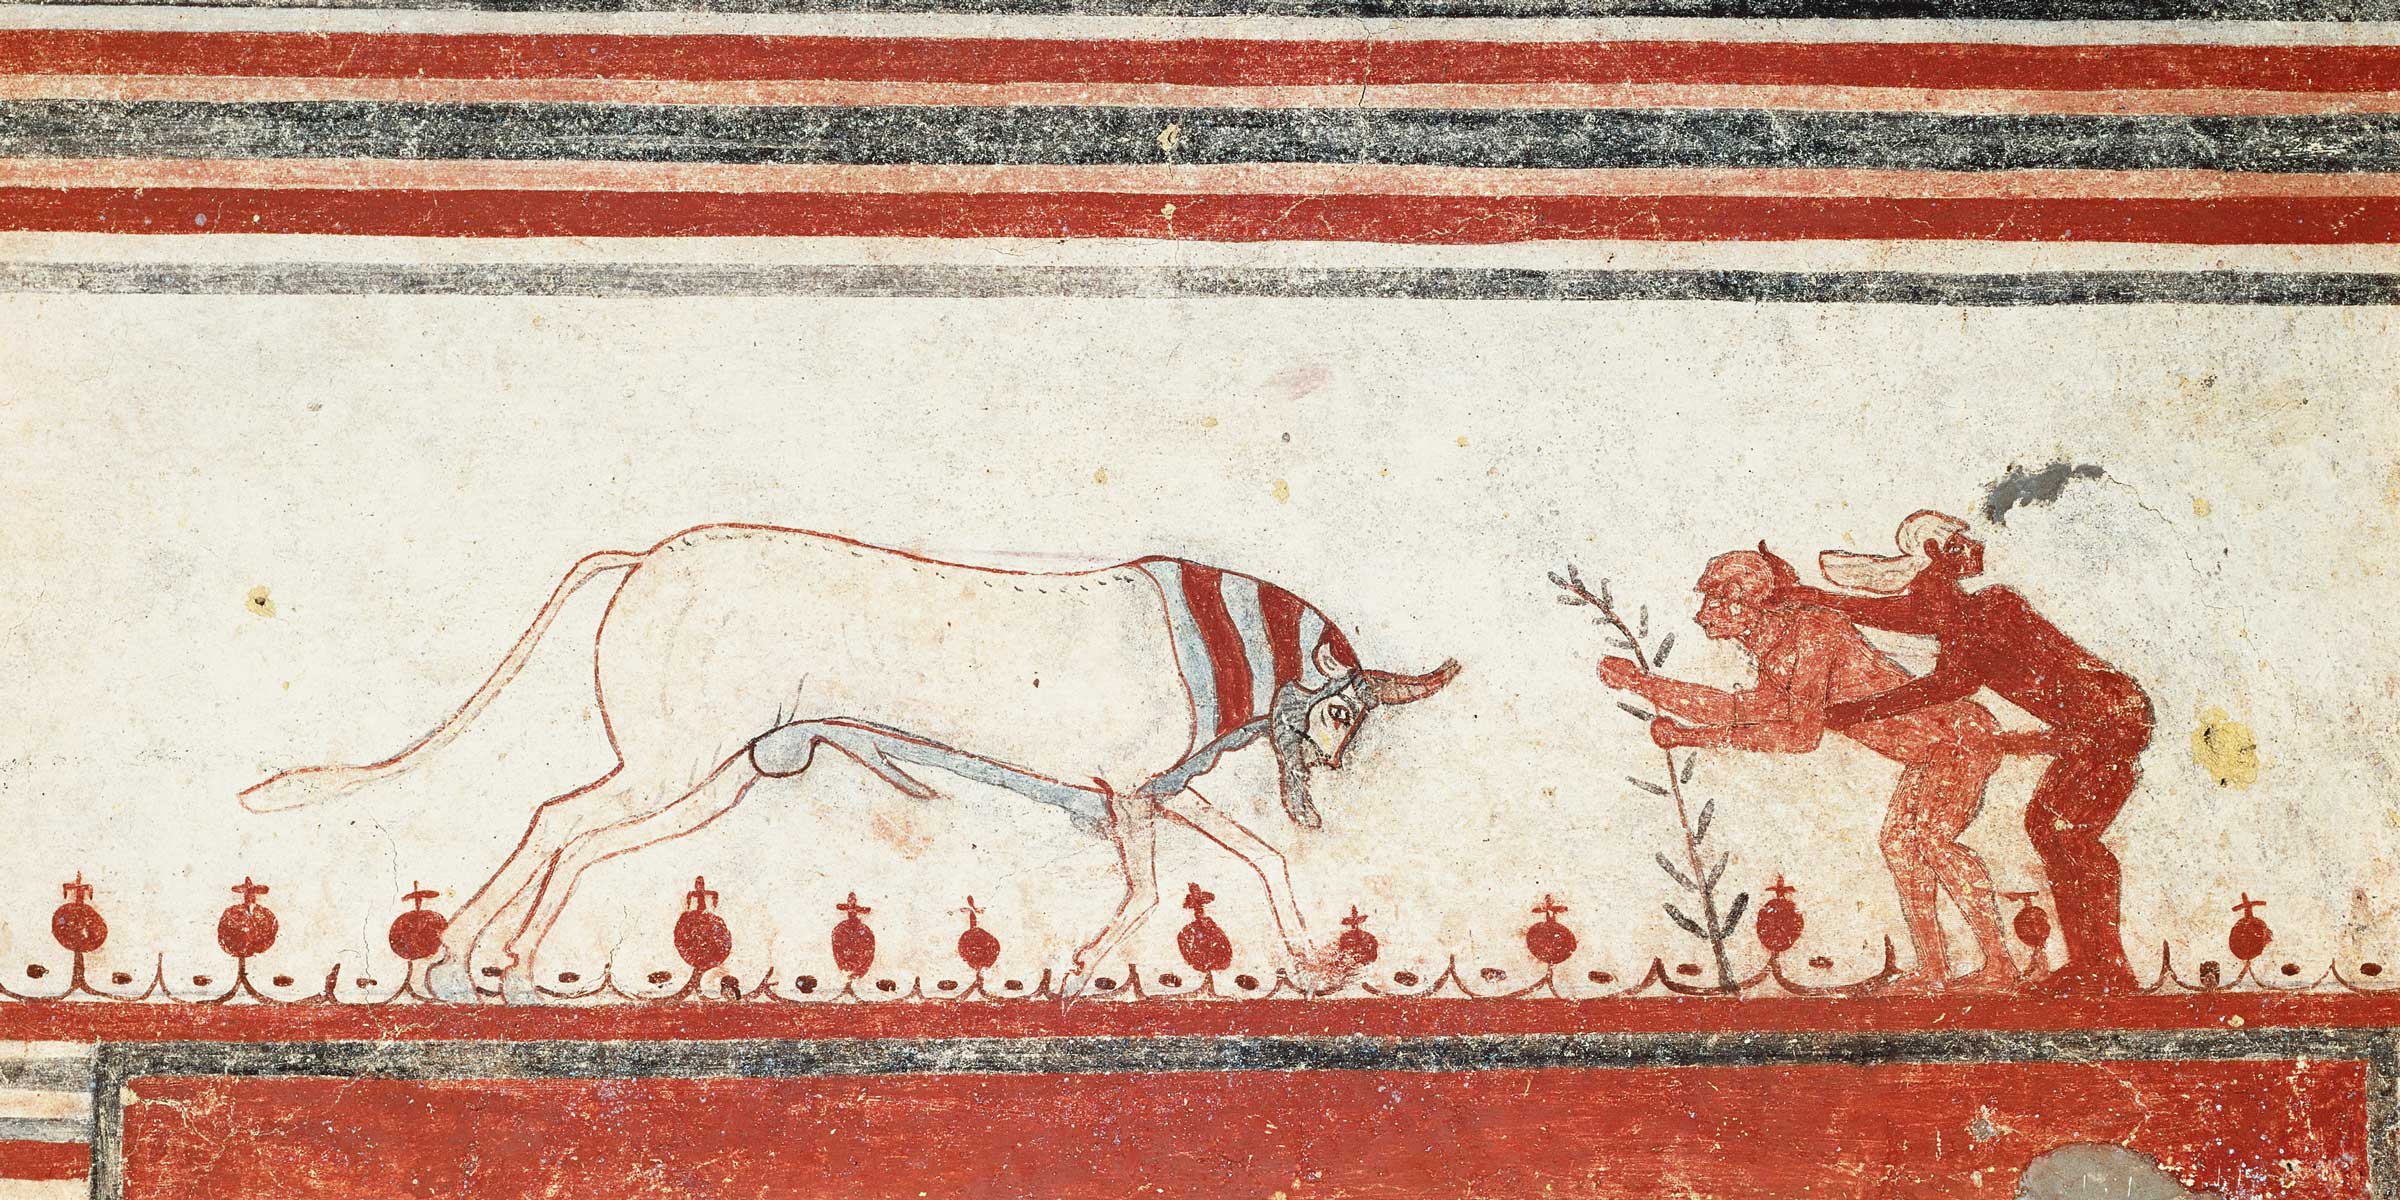 A bull charging a couple in flagrante delicto, Etruscan tomb, Tarquinia, c. 550 BC. Scala/Art Resource, NY.